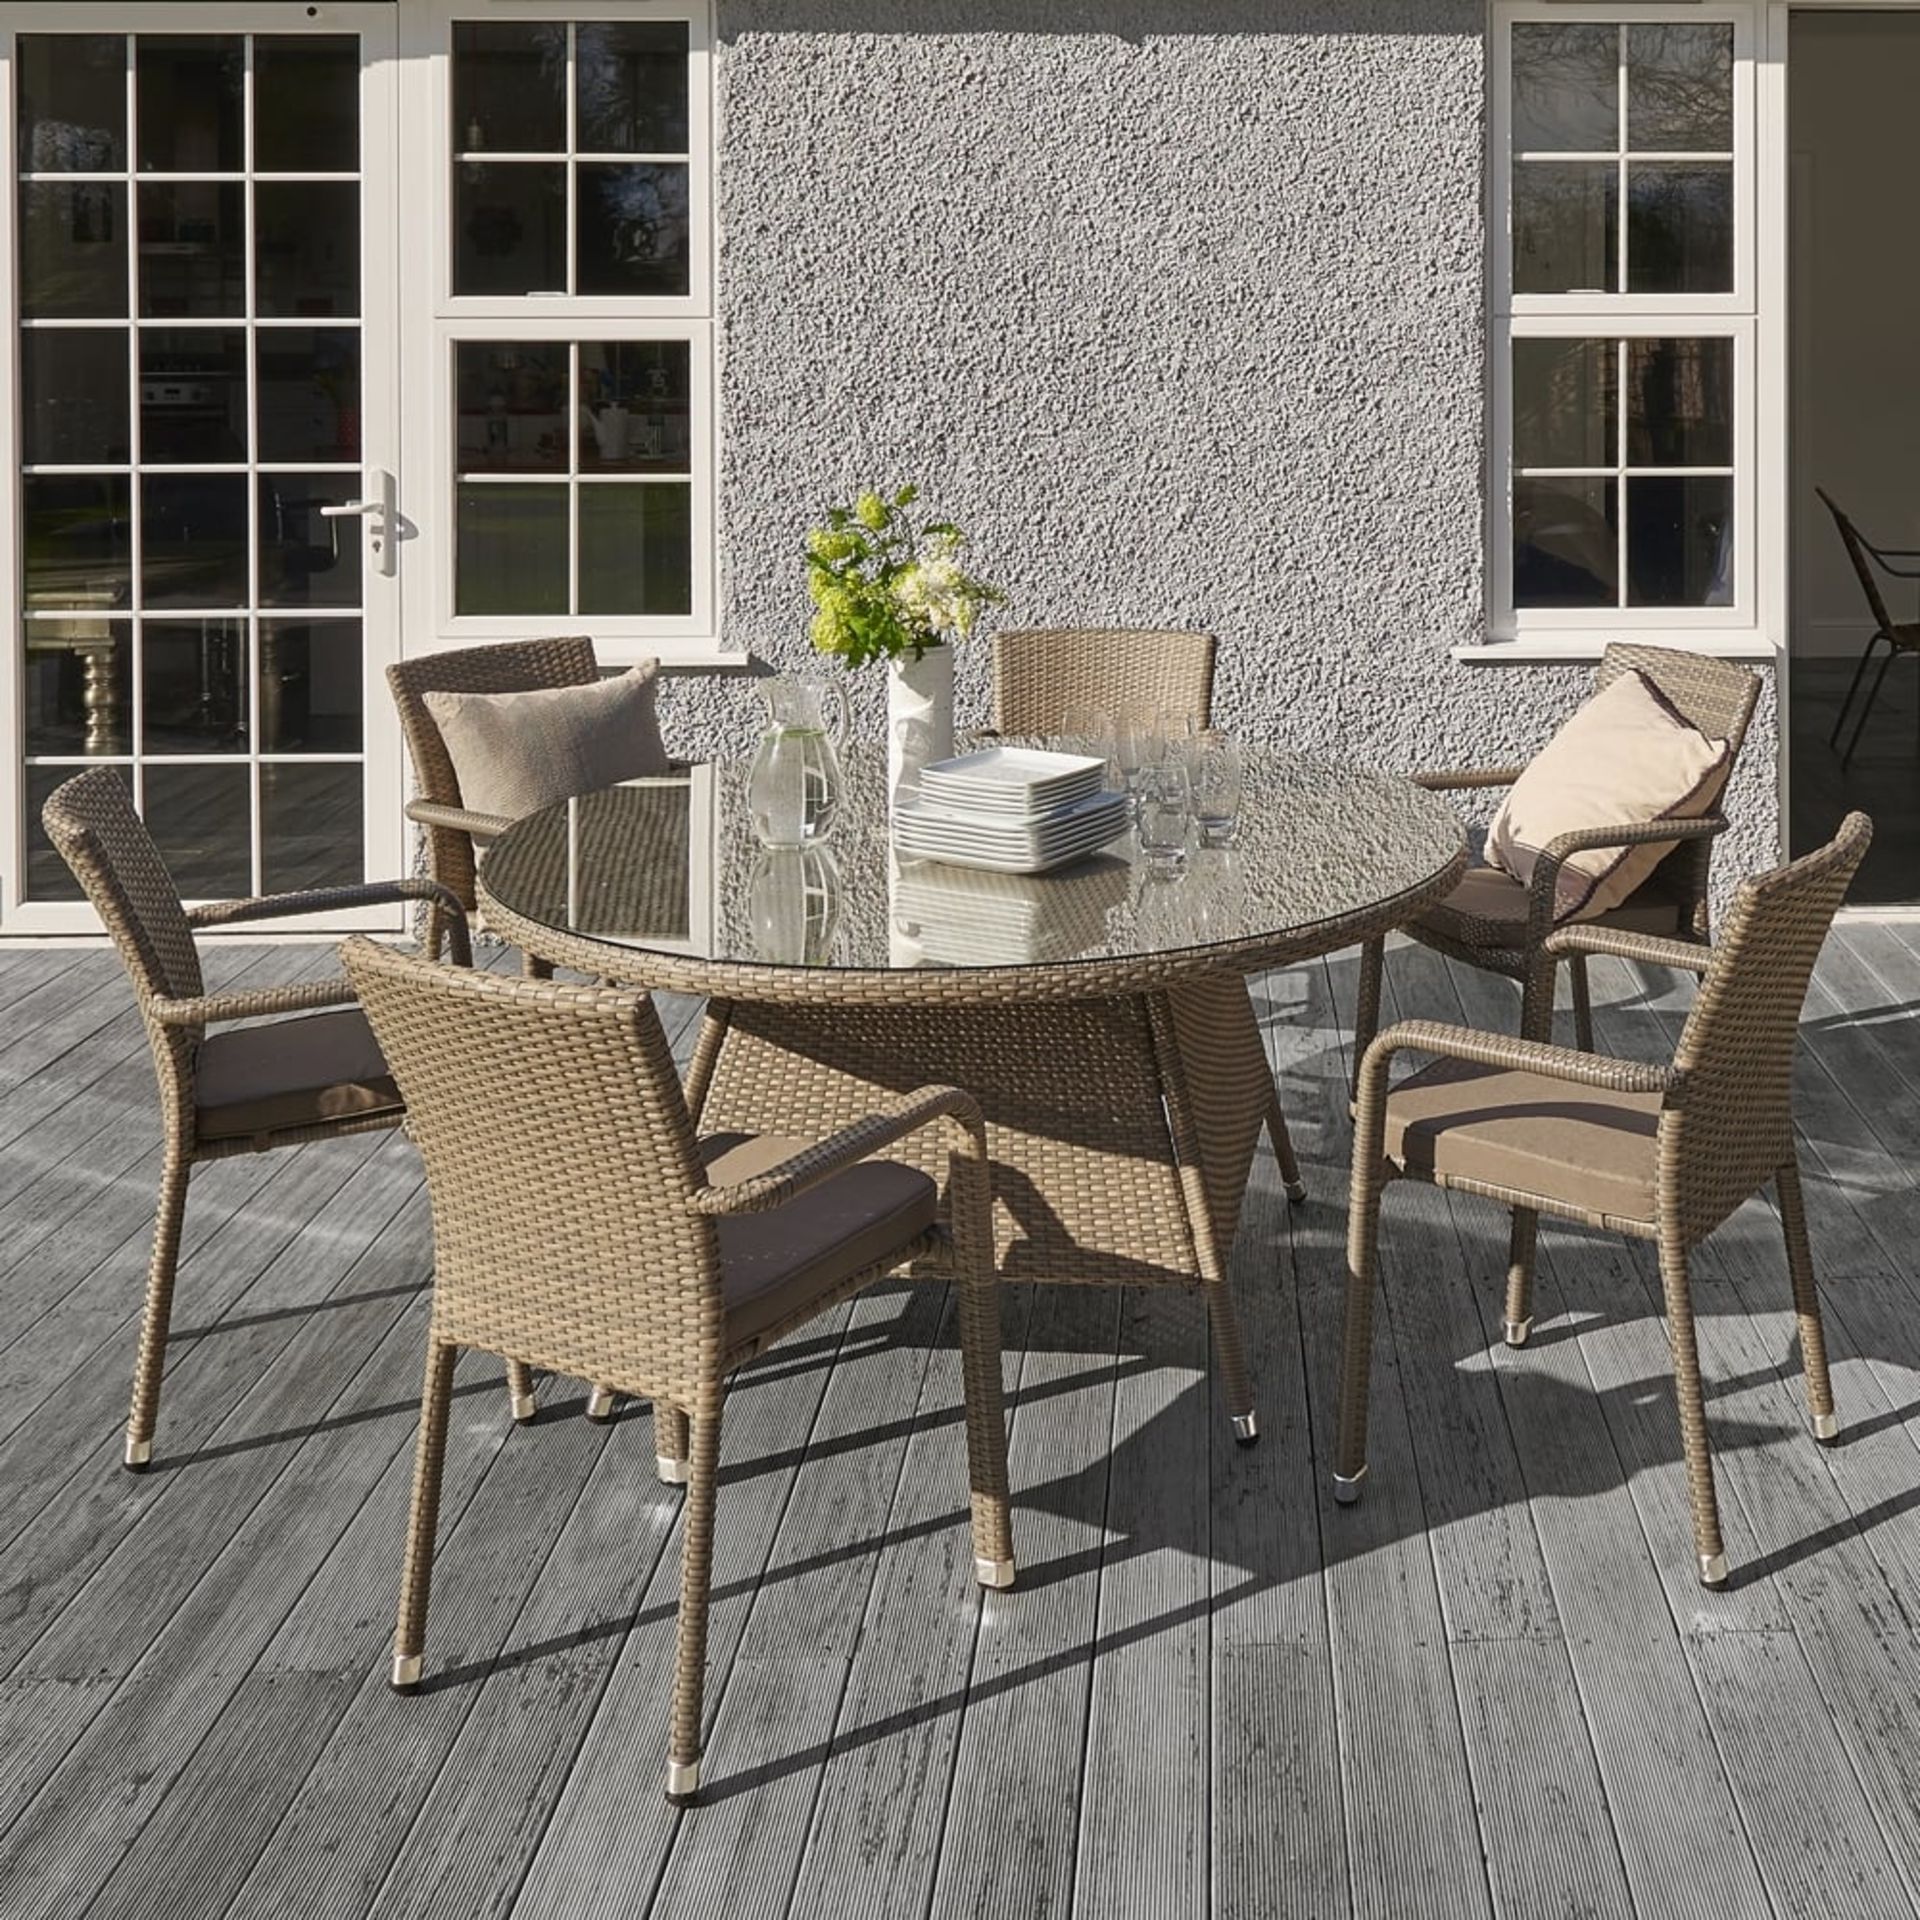 The Edinburgh rattan dining set in taupe consists of 6 stackable dining arm chairs with seat